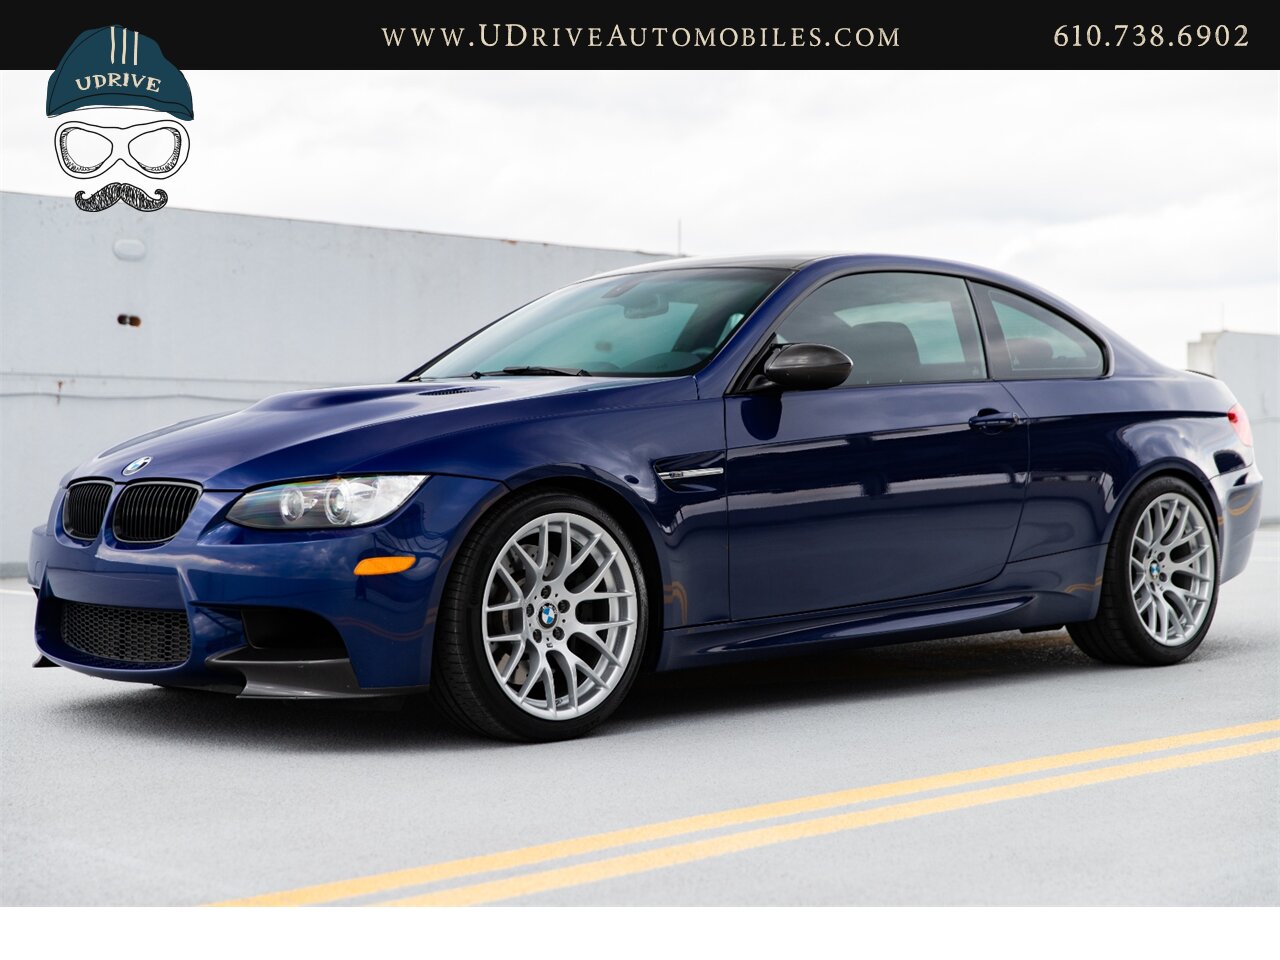 2011 BMW M3 E92 6 Speed Manual Competition Pkg Interlagos Blue  16k Miles Nav PDC EDC Comf Acc - Photo 10 - West Chester, PA 19382